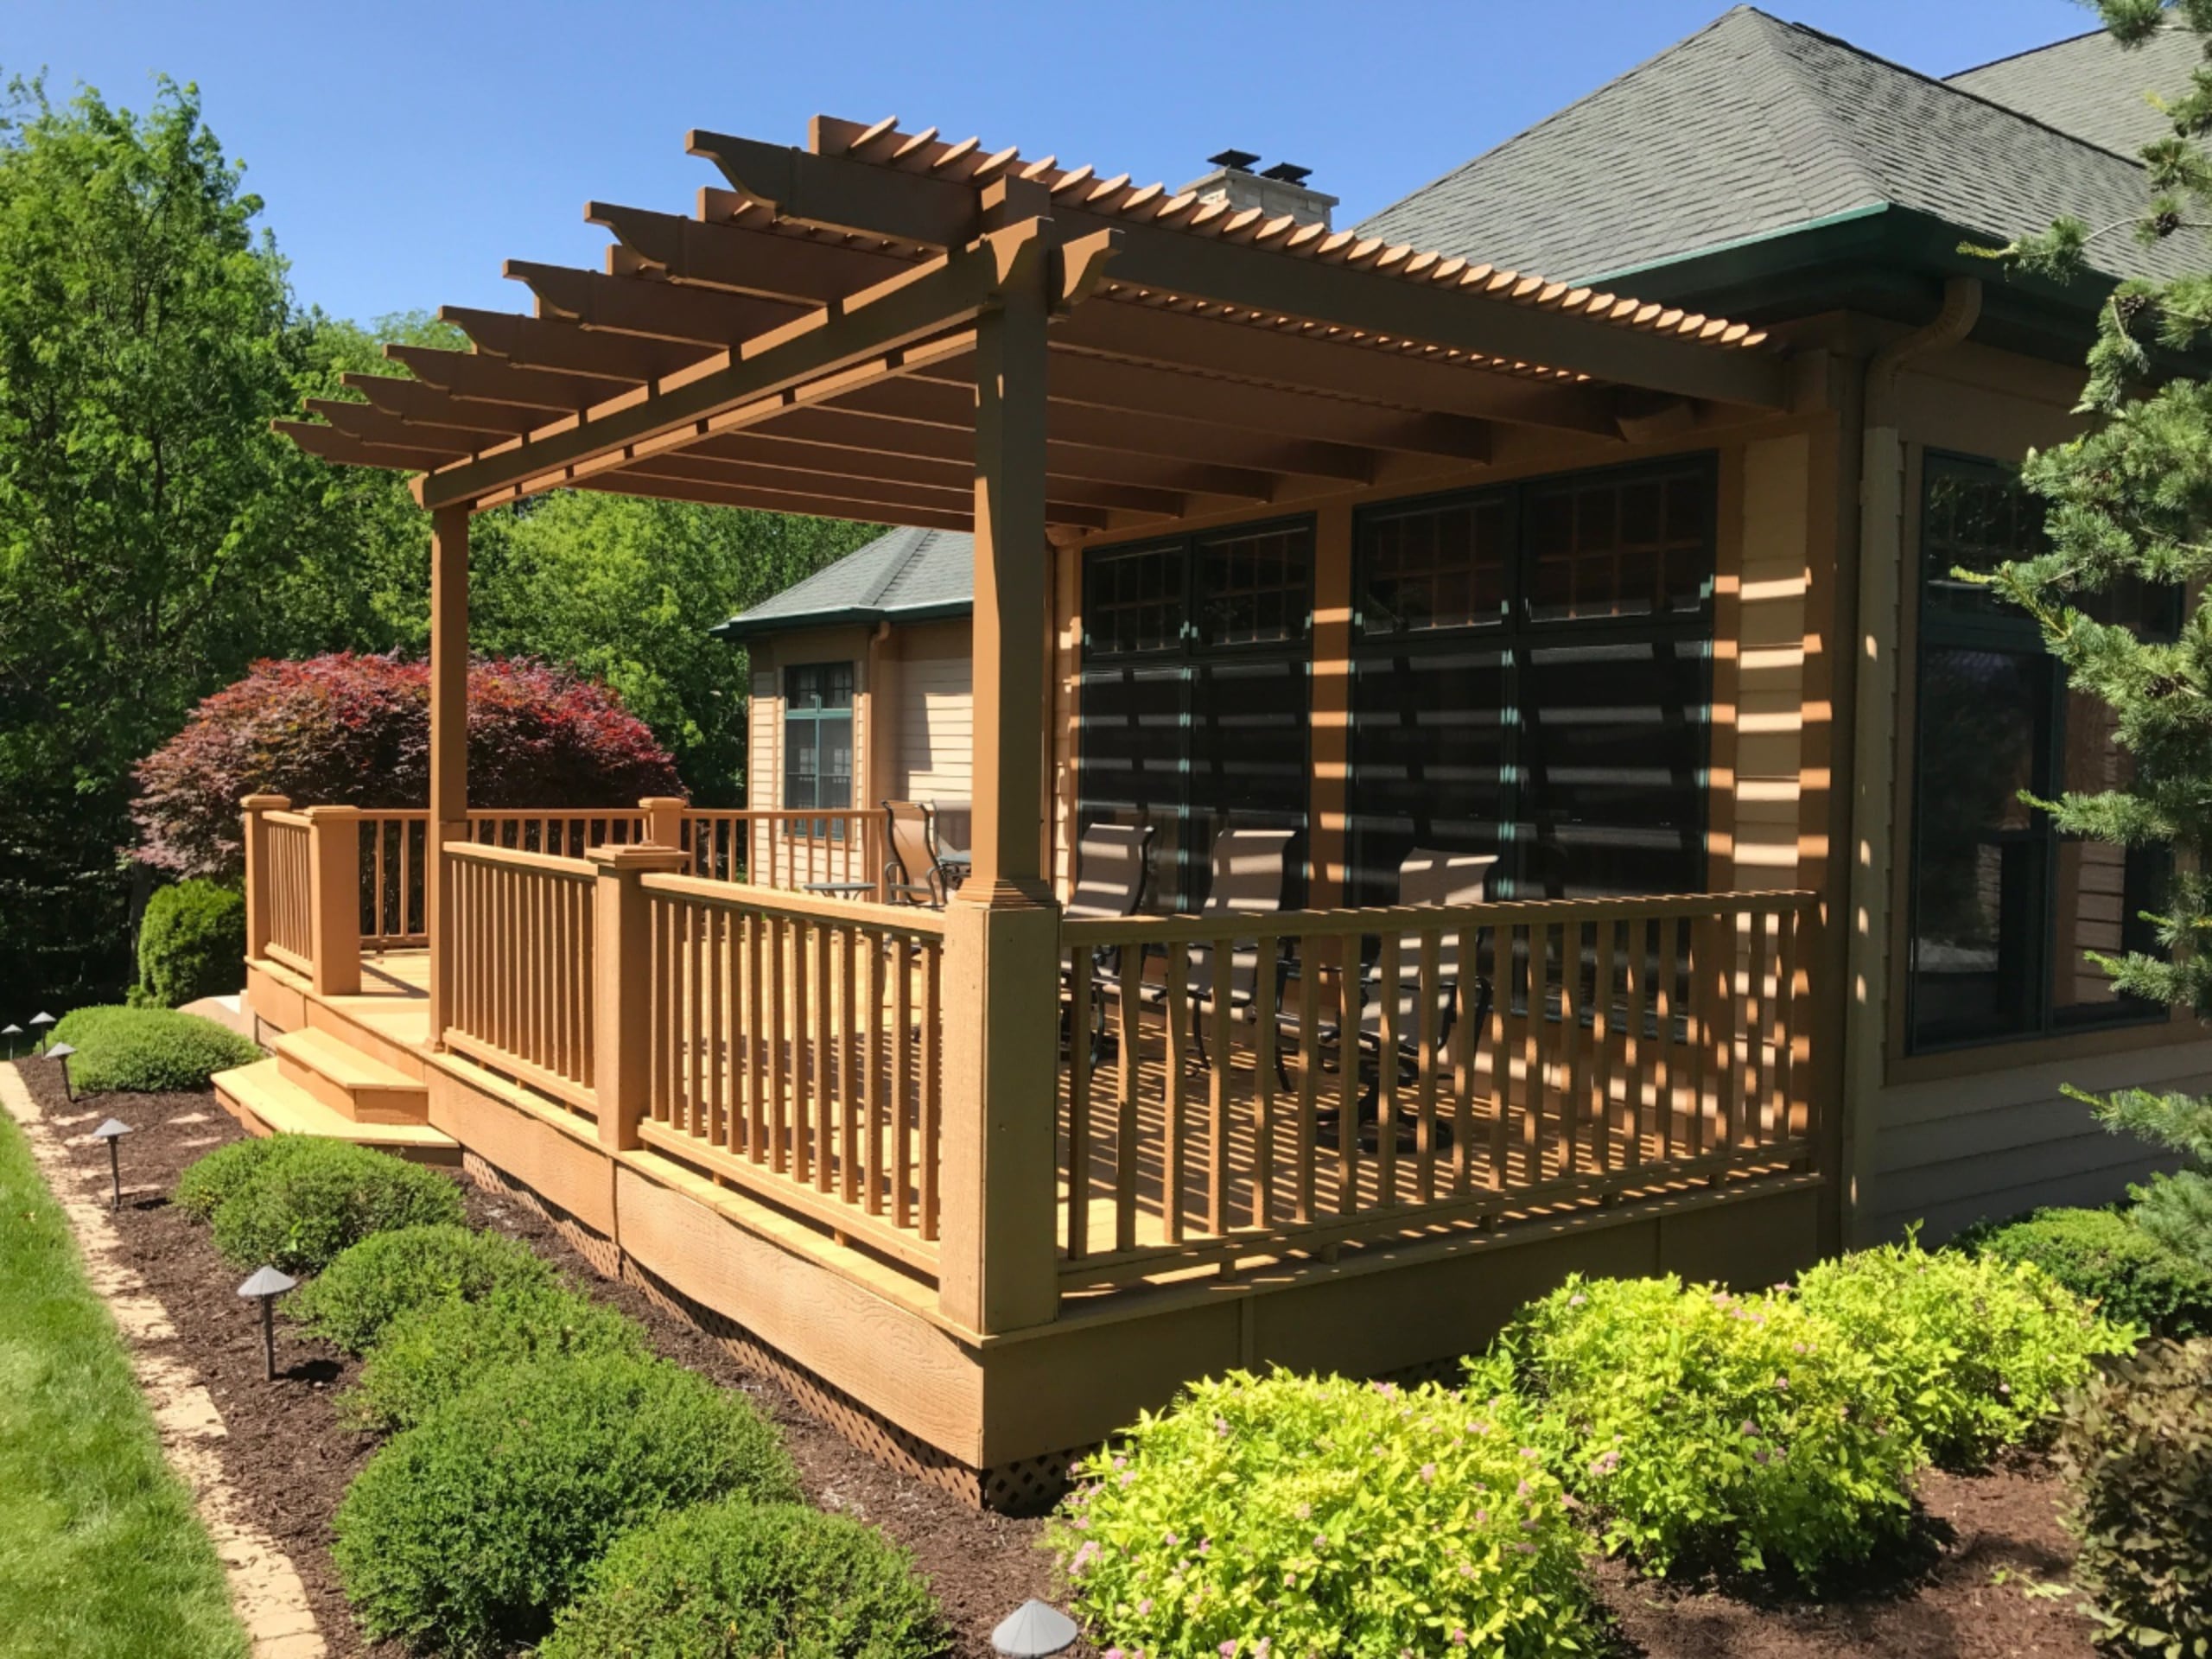 This wooden pergola is set above half of this home’s back deck, leaving one side in direct sunlight and the other side with shade. There are green shrubs surrounding the deck’s perimeter.